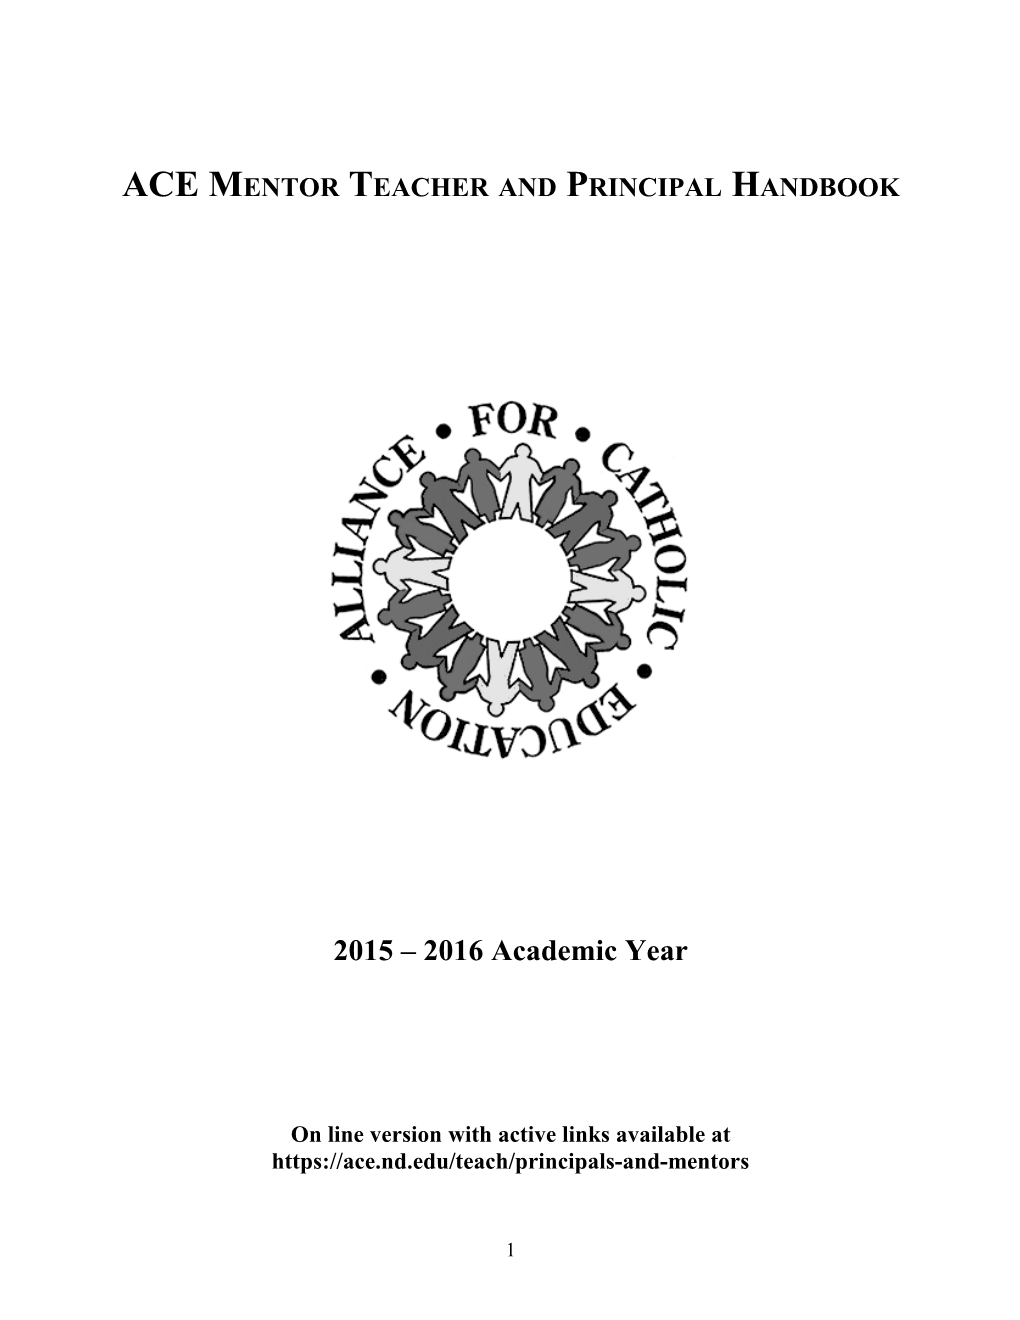 Elements of the ACE Mentor Program